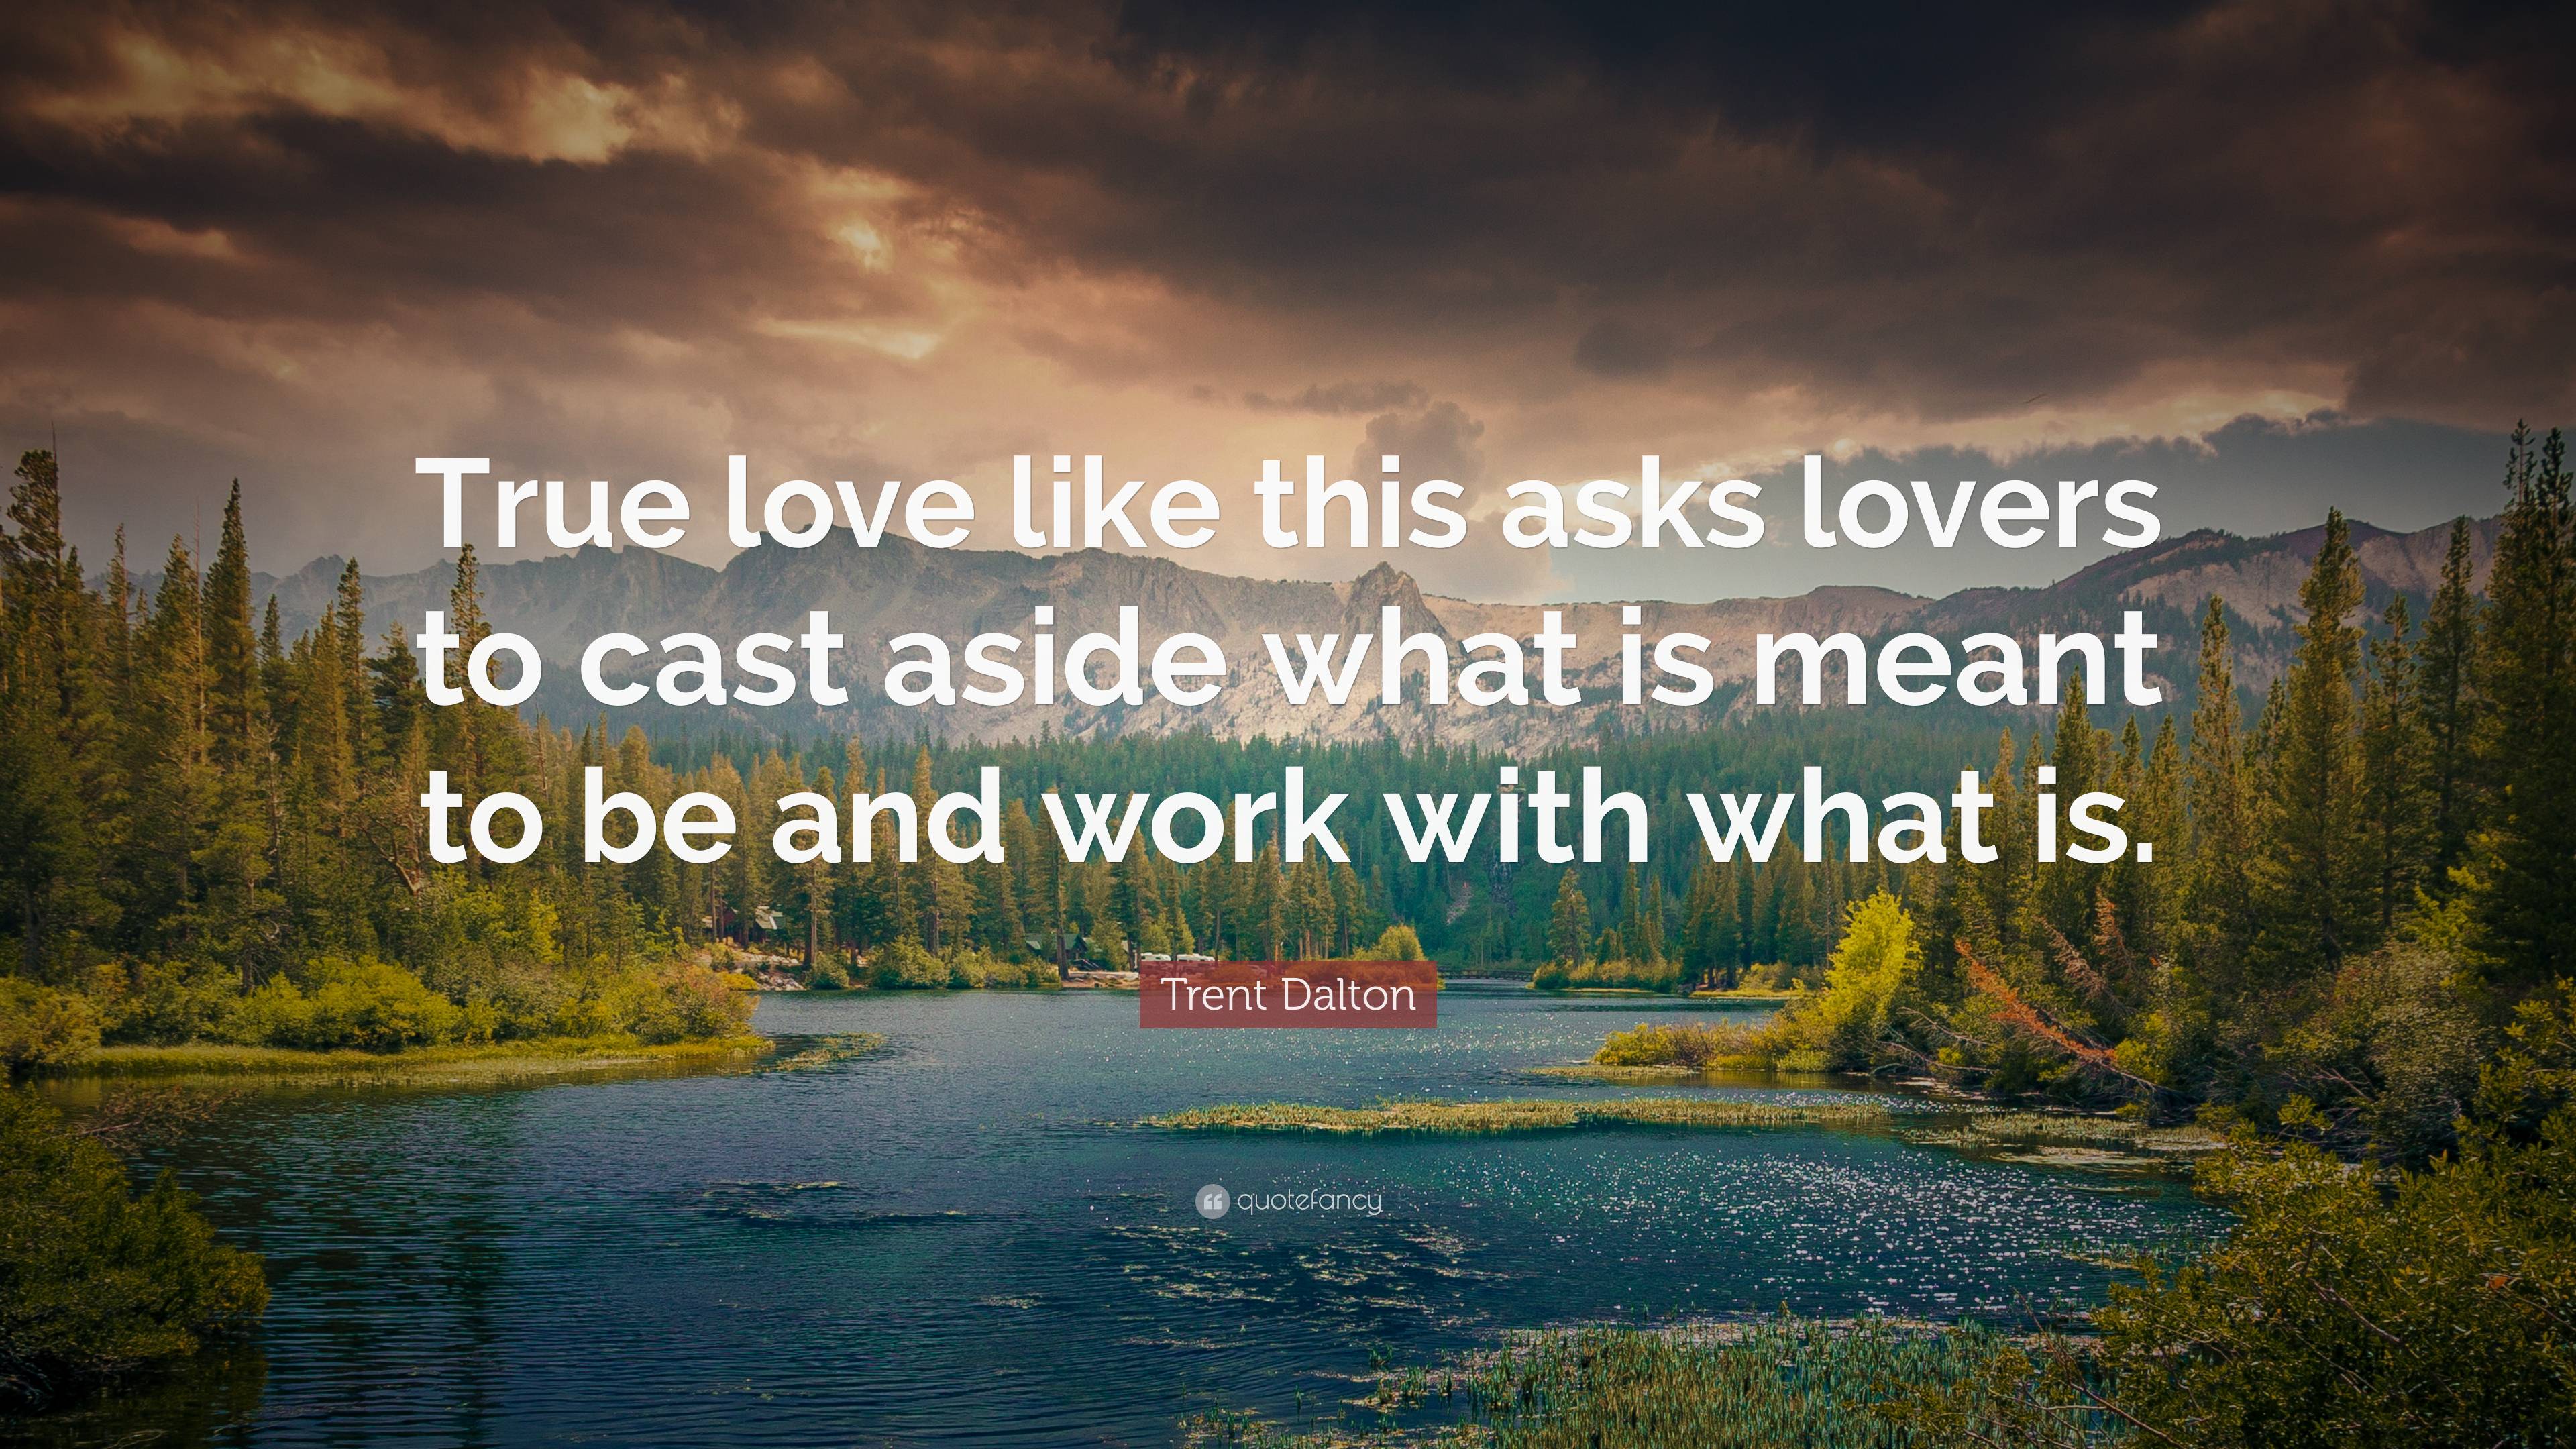 Trent Dalton Quote: “True love like this asks lovers to cast aside what is  meant to